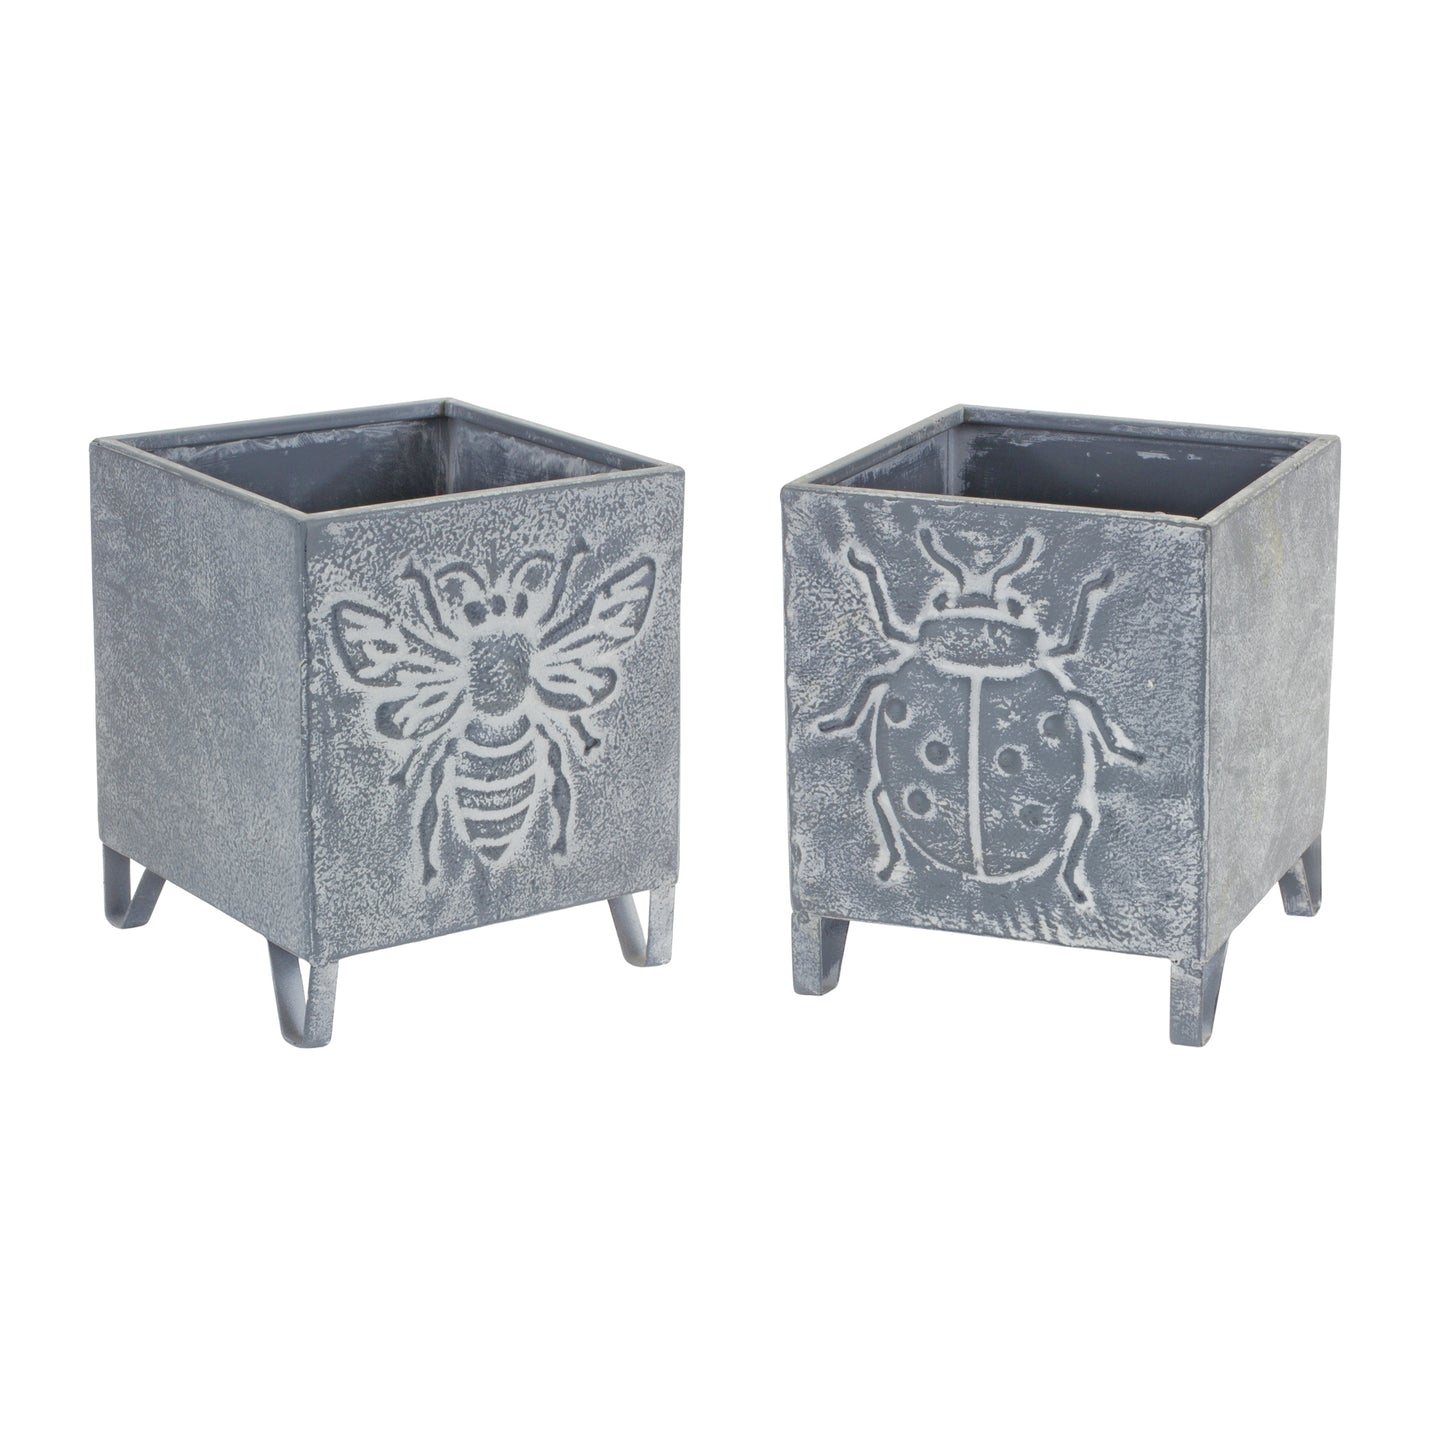 Insect Pot (Set of 2) 6.75"L x 7.5"H Iron